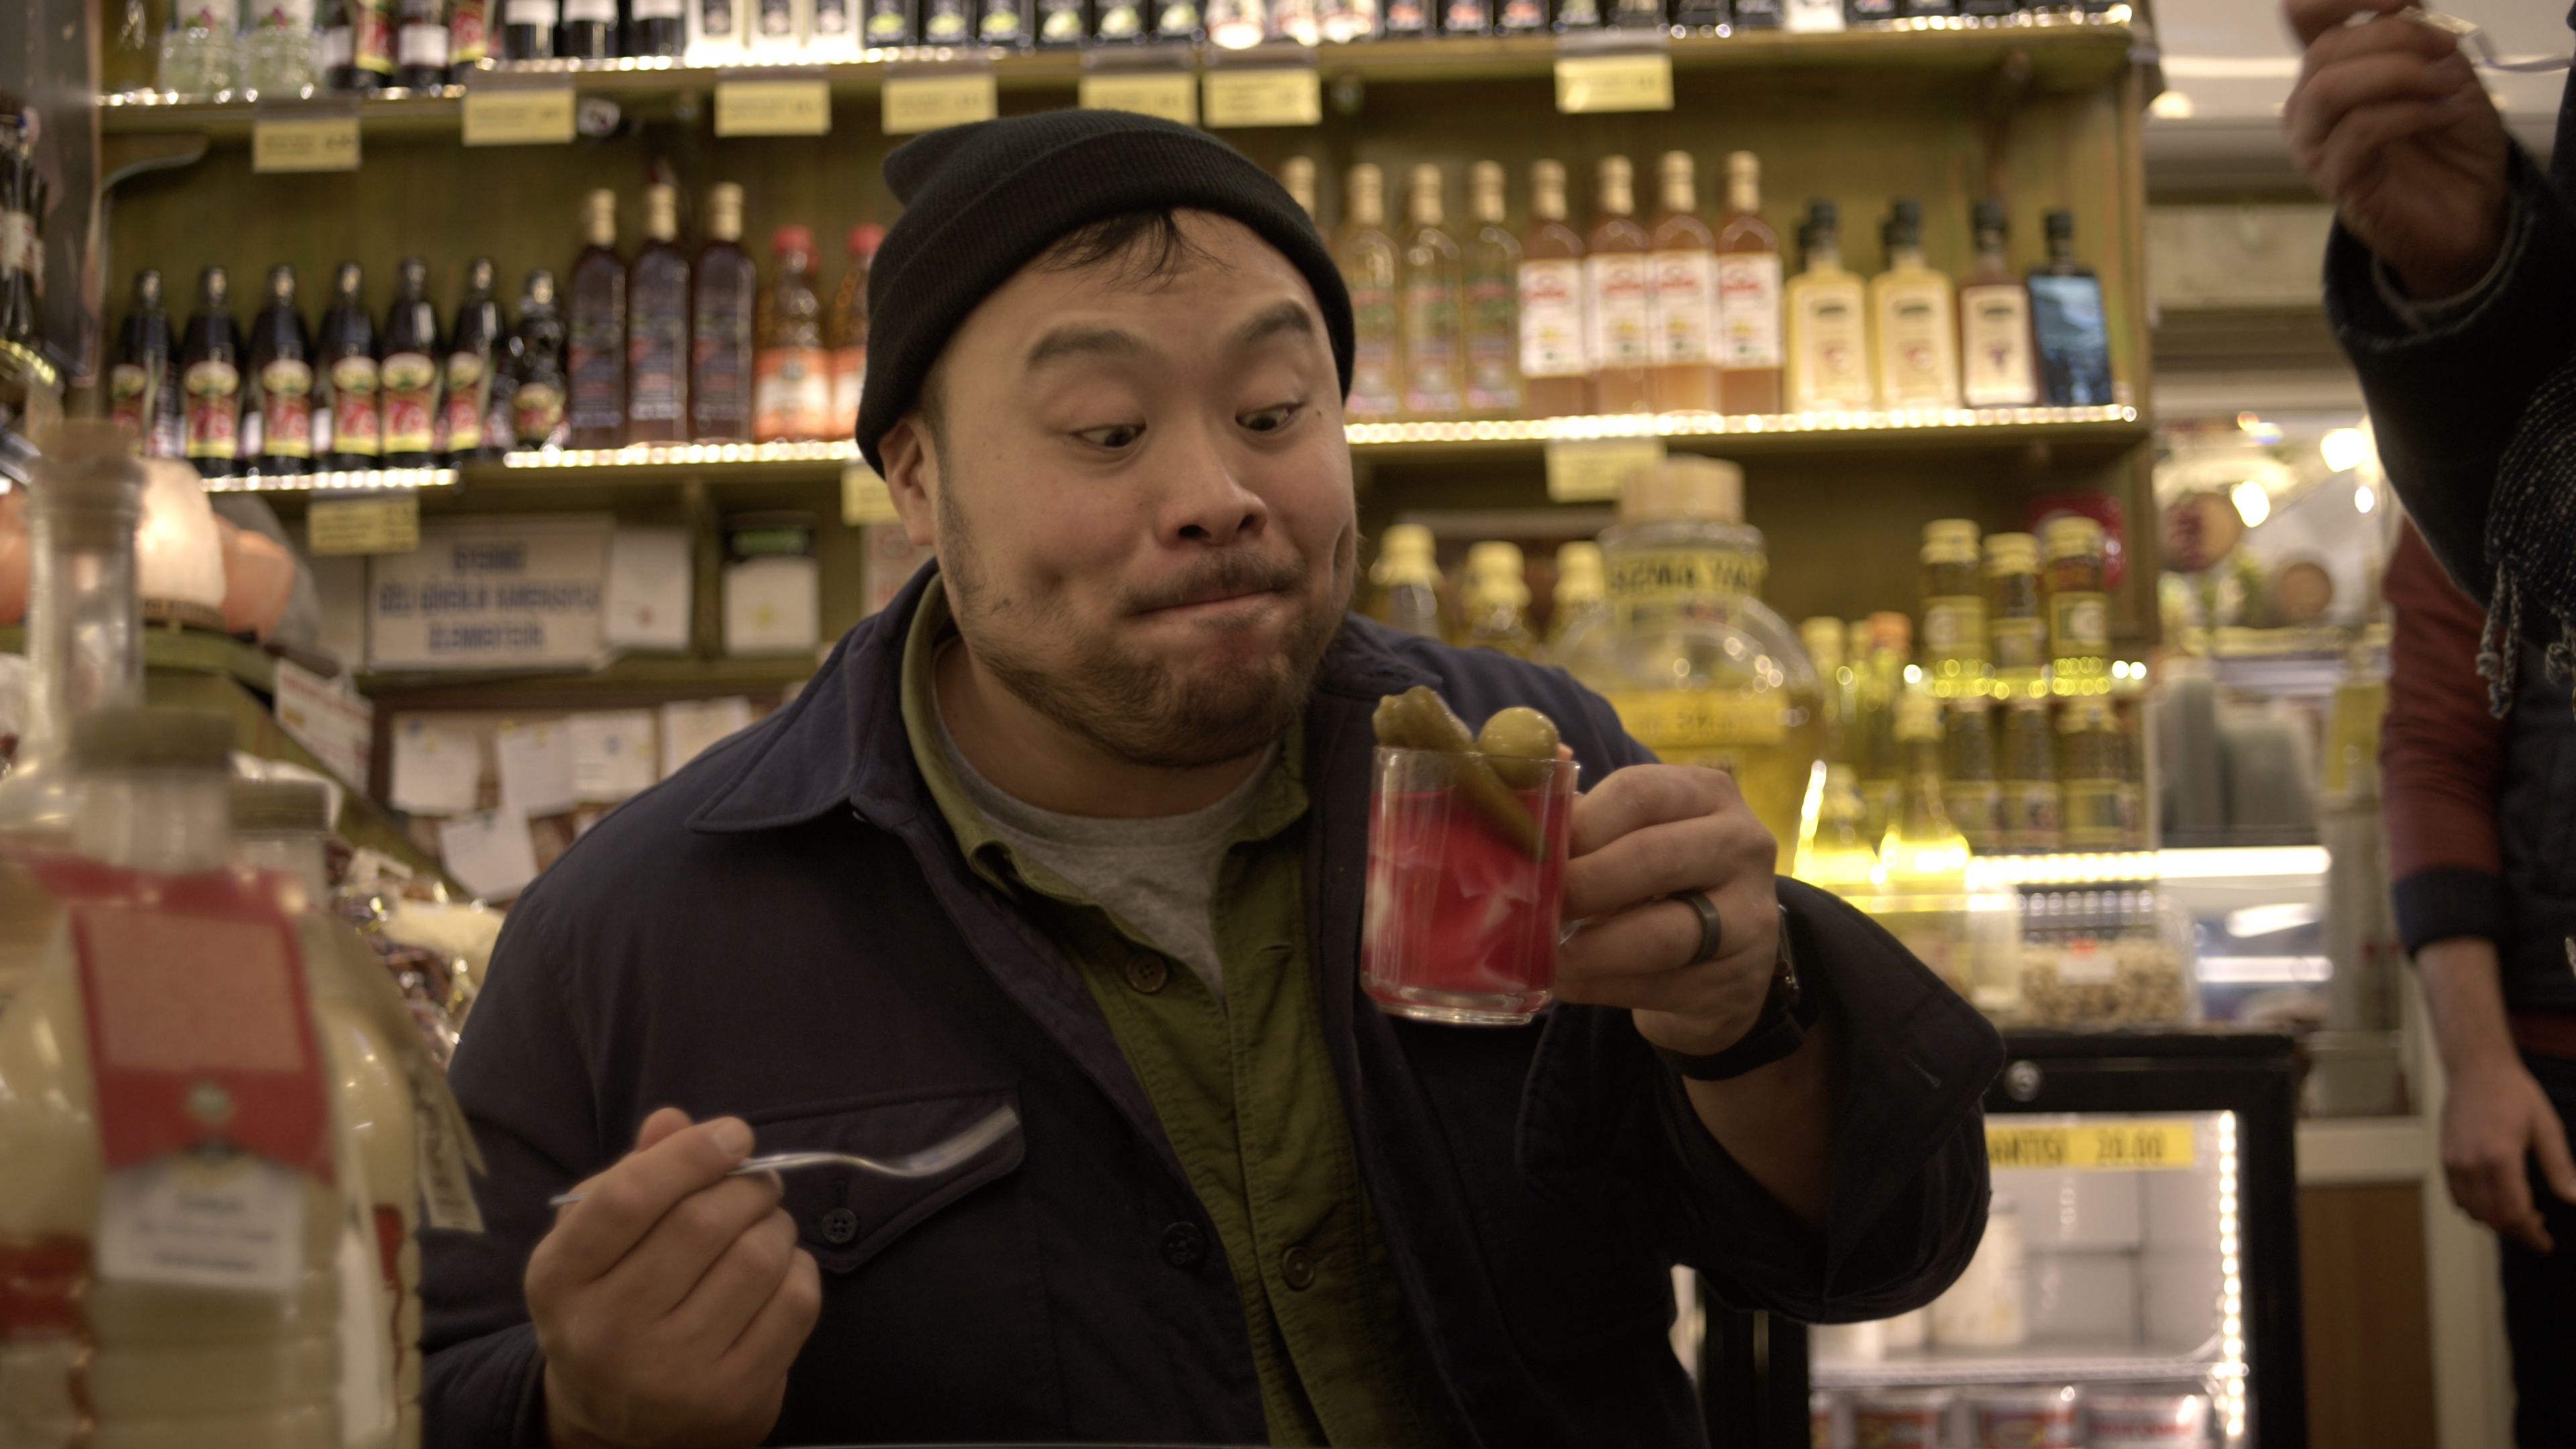 David Chang making a goofy face at a glass of pickle juice.